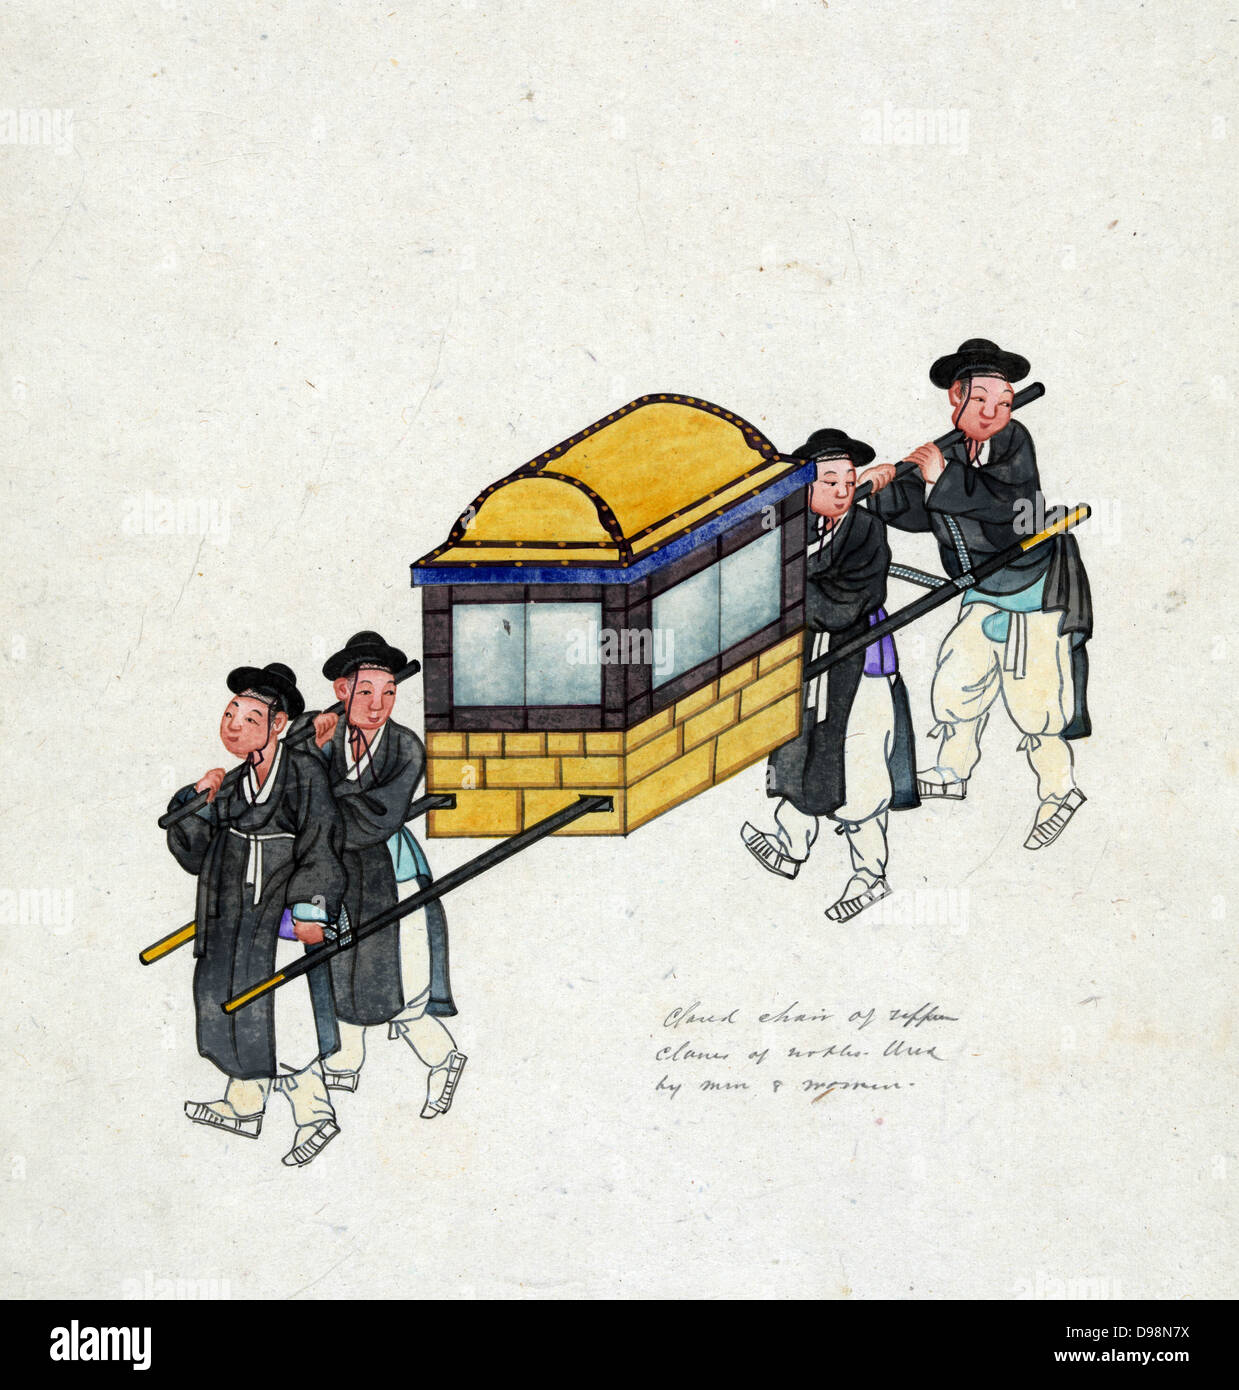 Korean Gama used by the privileged classes, a form of closed chair similar to a Palanquin, Litter or Sedan chair, carried by porters. Watercolour, c1890. Transport Power Manual Fashion Dress Traditional Stock Photo